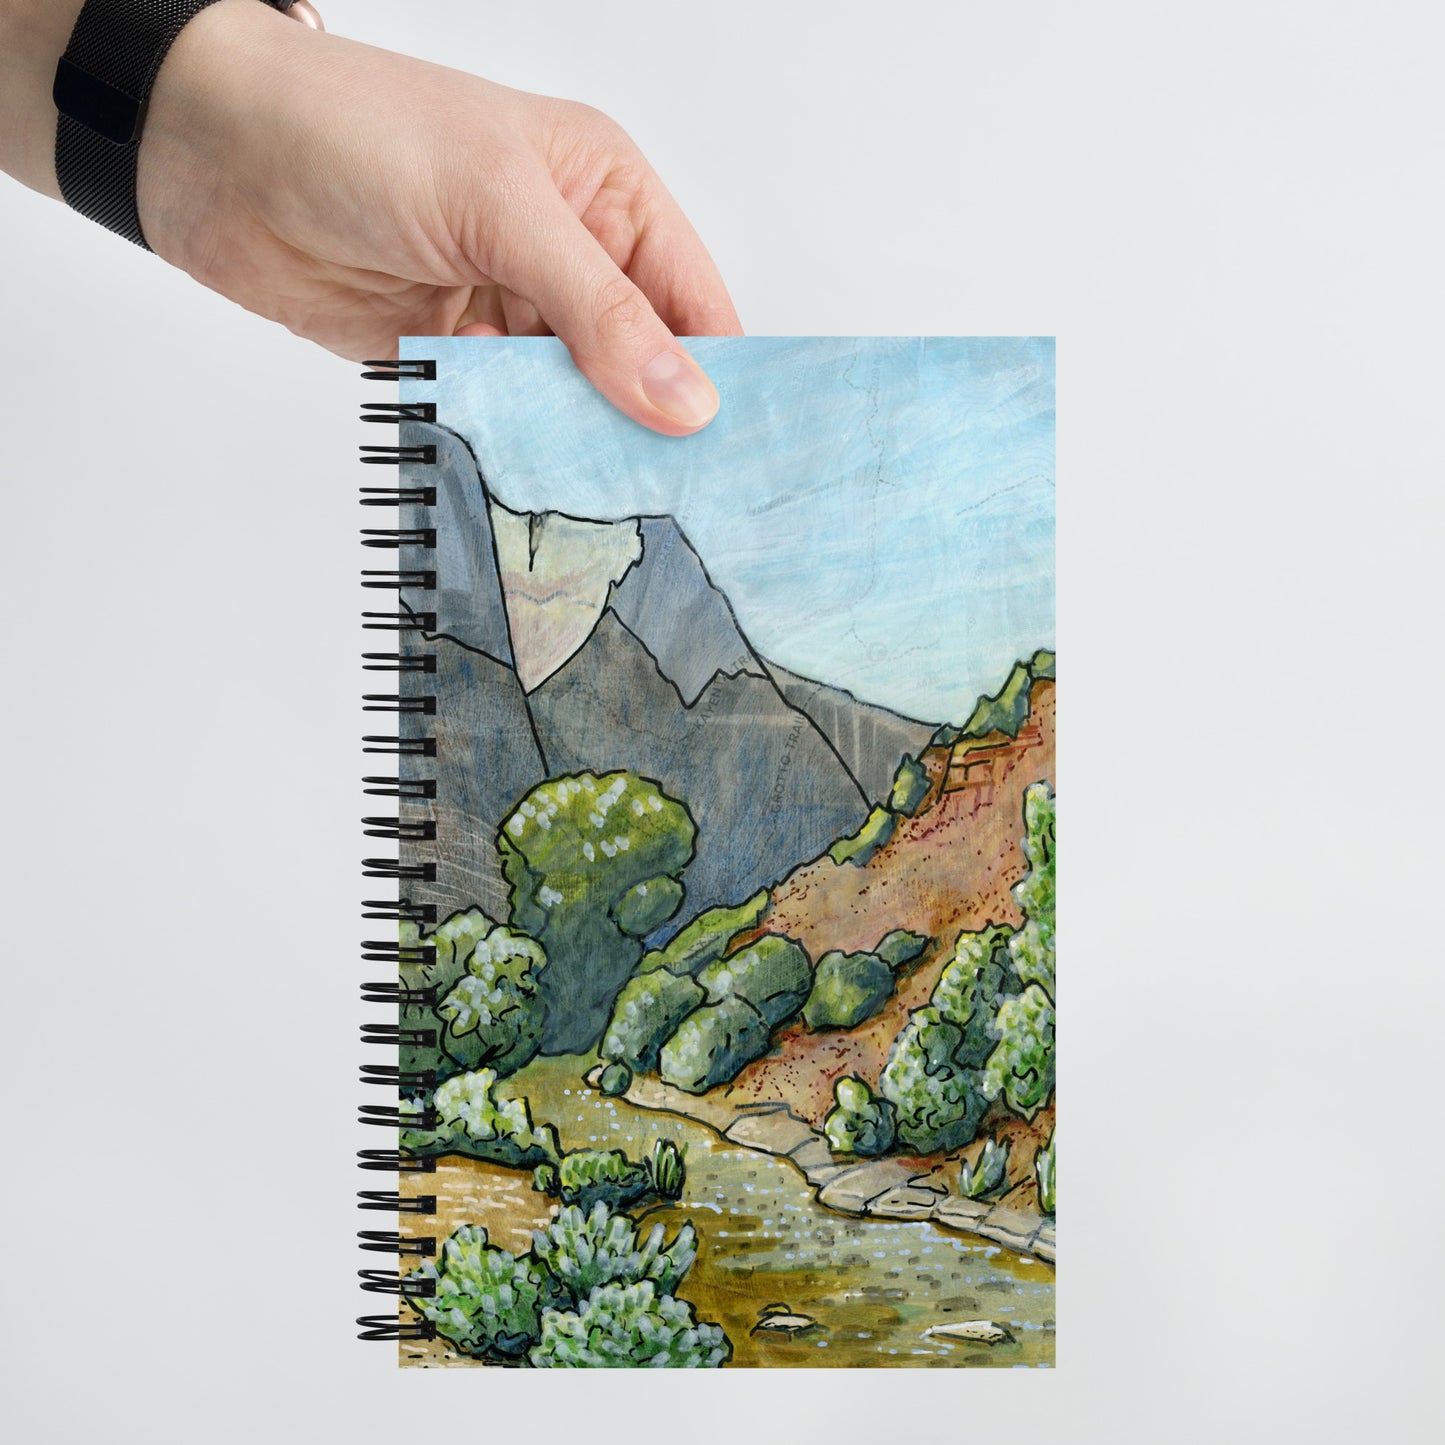 Grotto Trail Spiral notebook